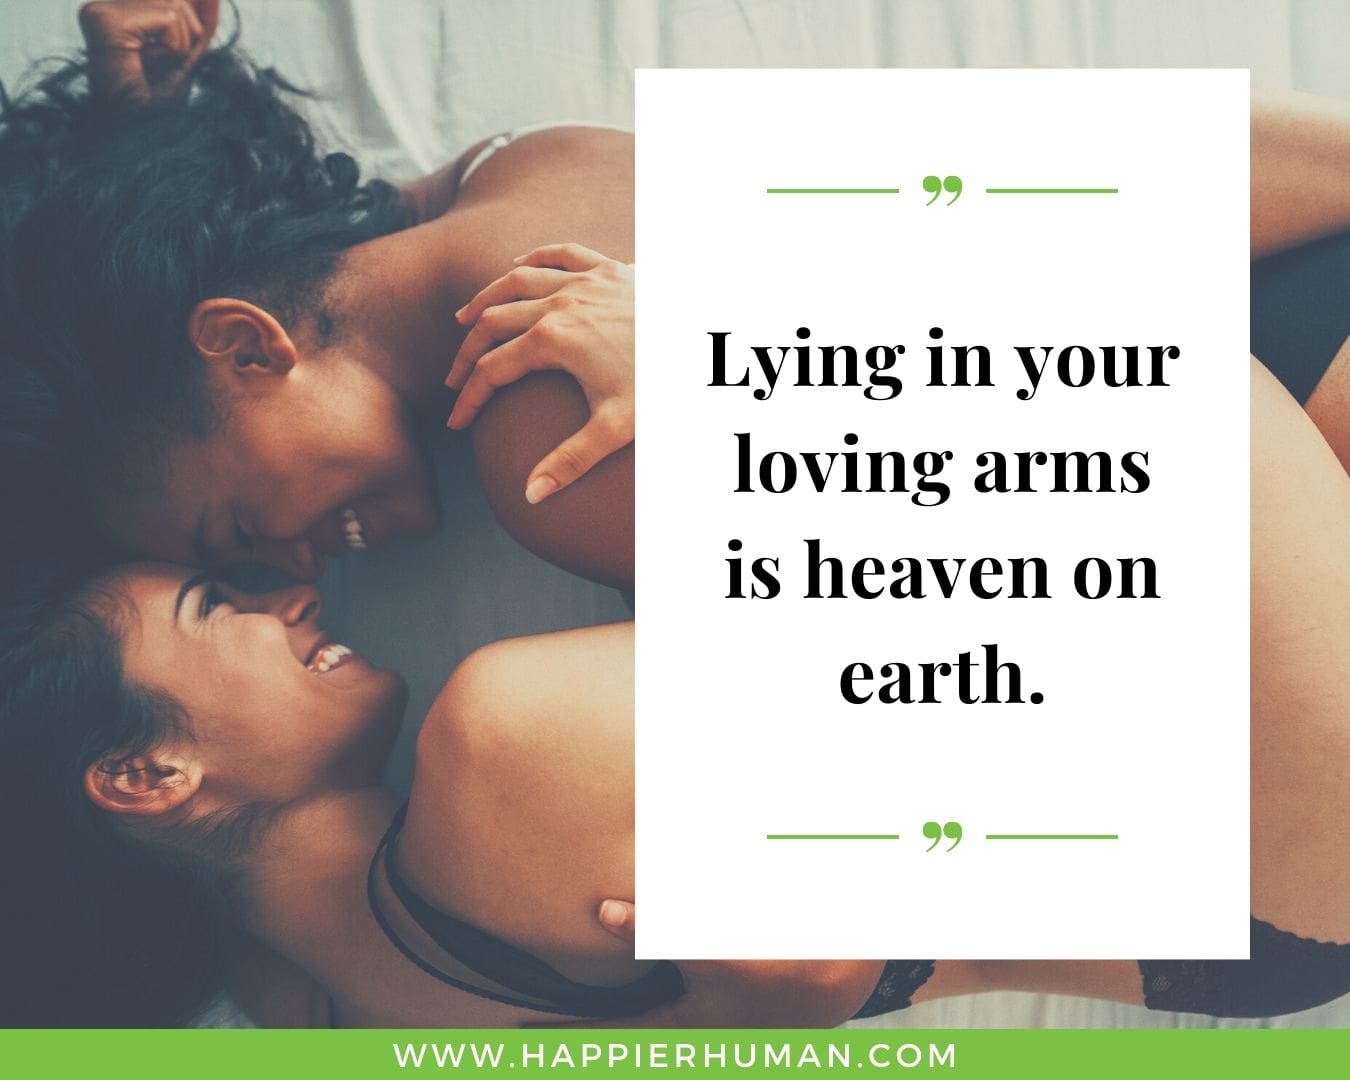 Short deep loving quotes for her “Lying in your loving arms is heaven on earth.”